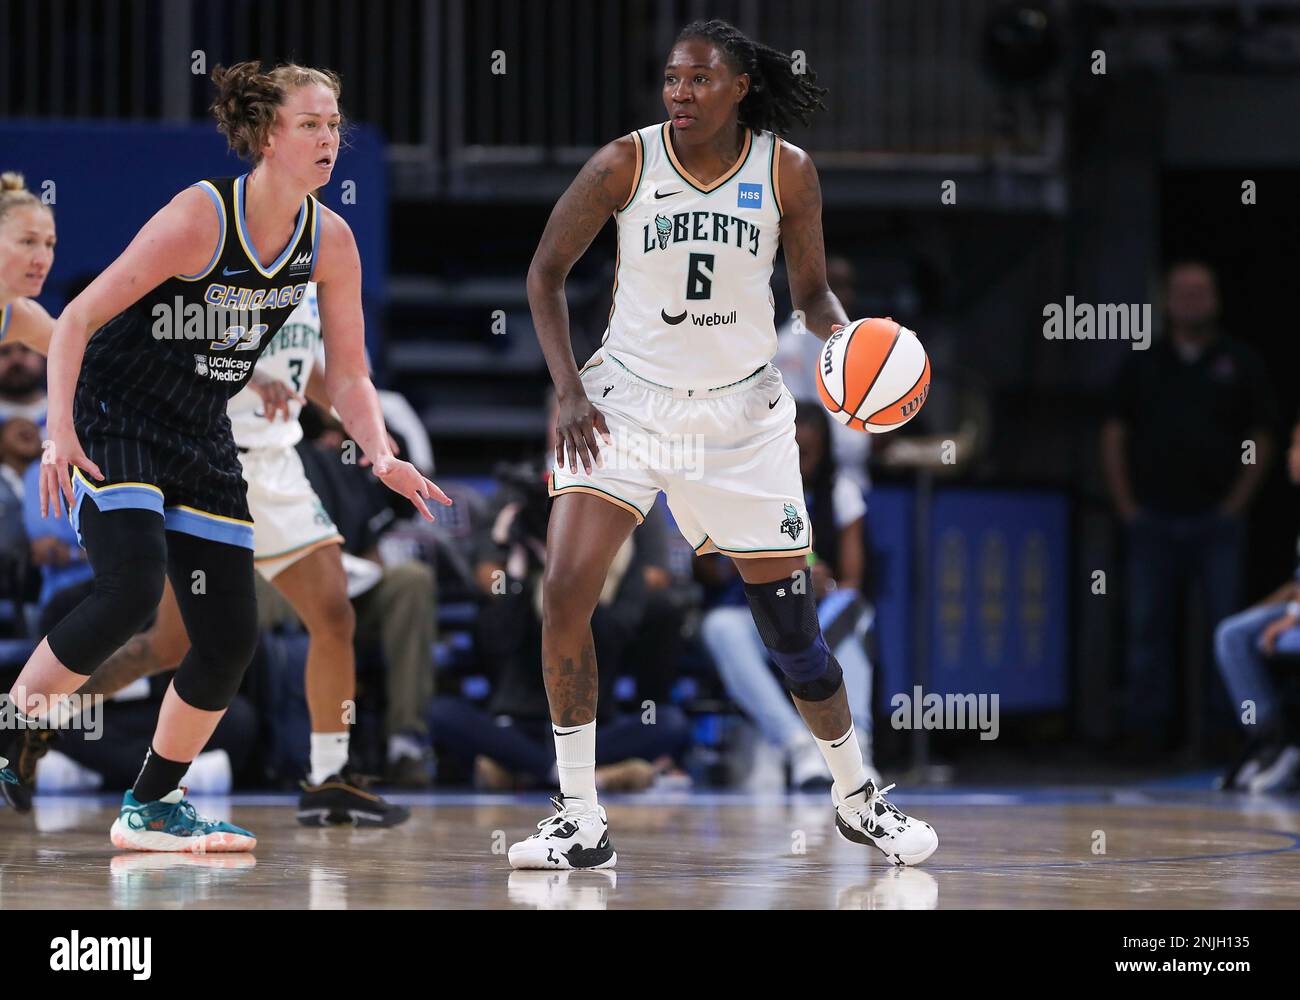 CHICAGO, IL - AUGUST 20: New York Liberty guard DiDi Richards (2) shoots  the ball over New York Liberty center Stefanie Dolson (31) during the first  half in game 2 of a